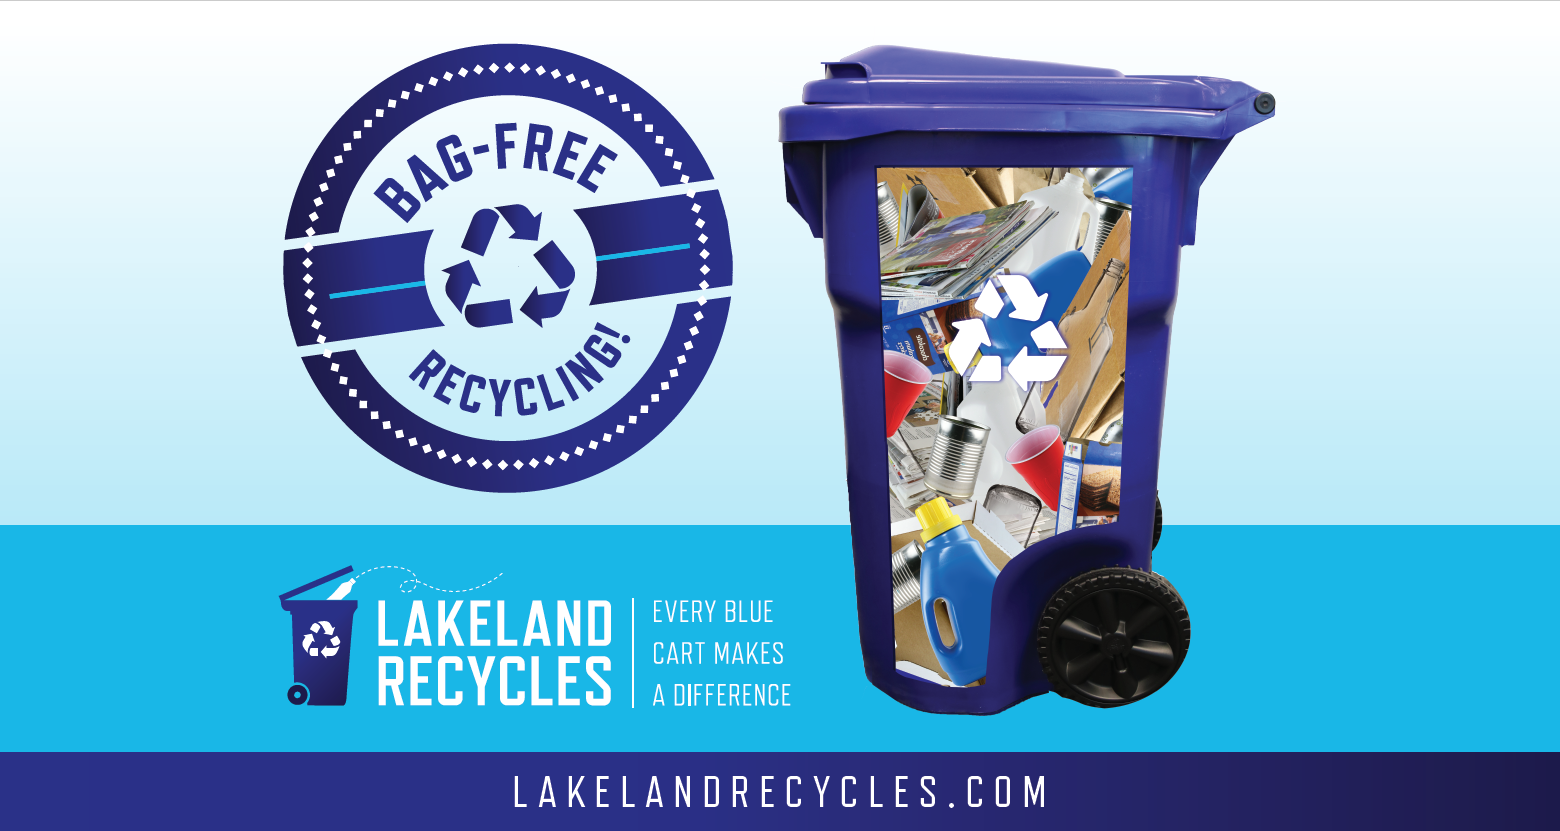 Blue recycling cart for Bag-Free Recycing with lakelandrecycles.com.